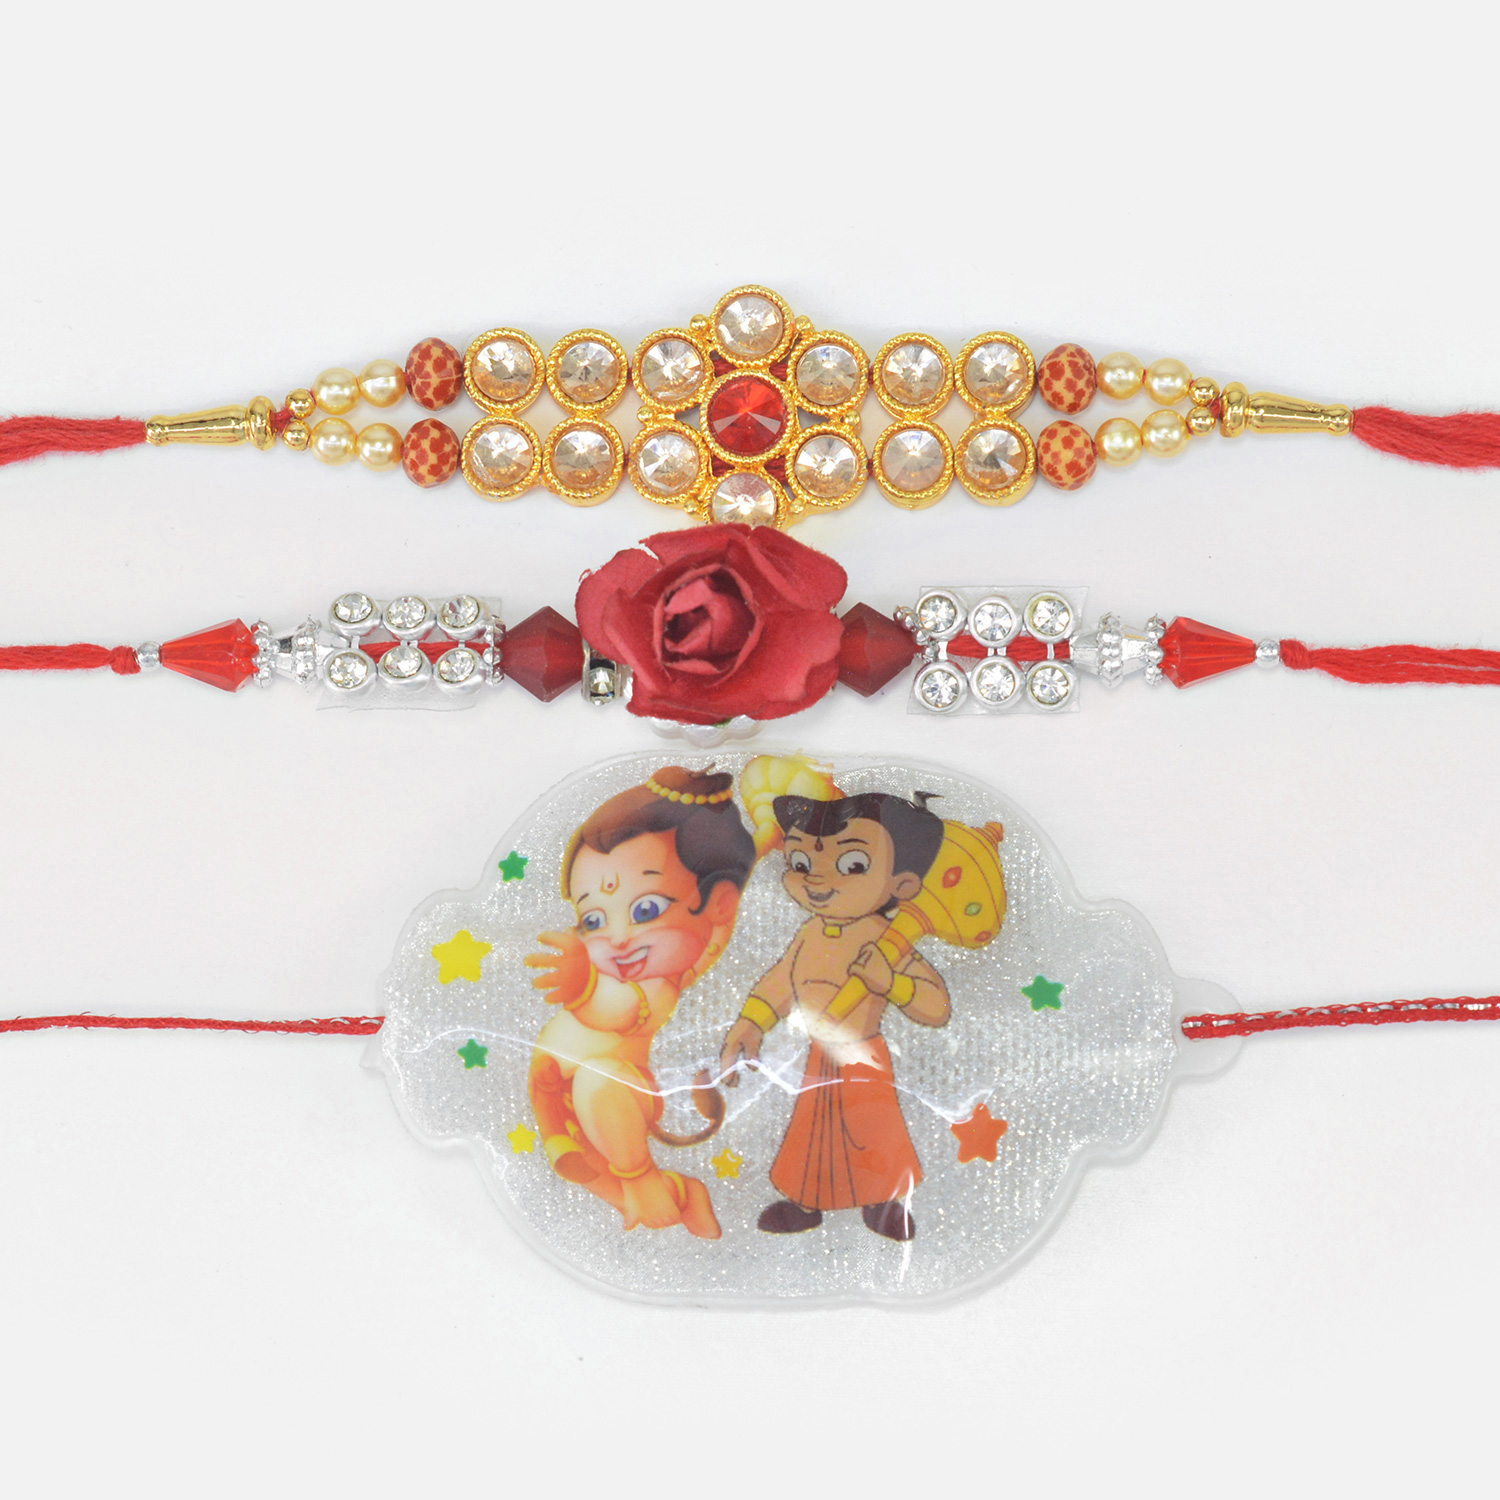 Jewel Studded Golden and Flower Designed Two Brother Rakhi with Cartoon Character Kid Rakhi